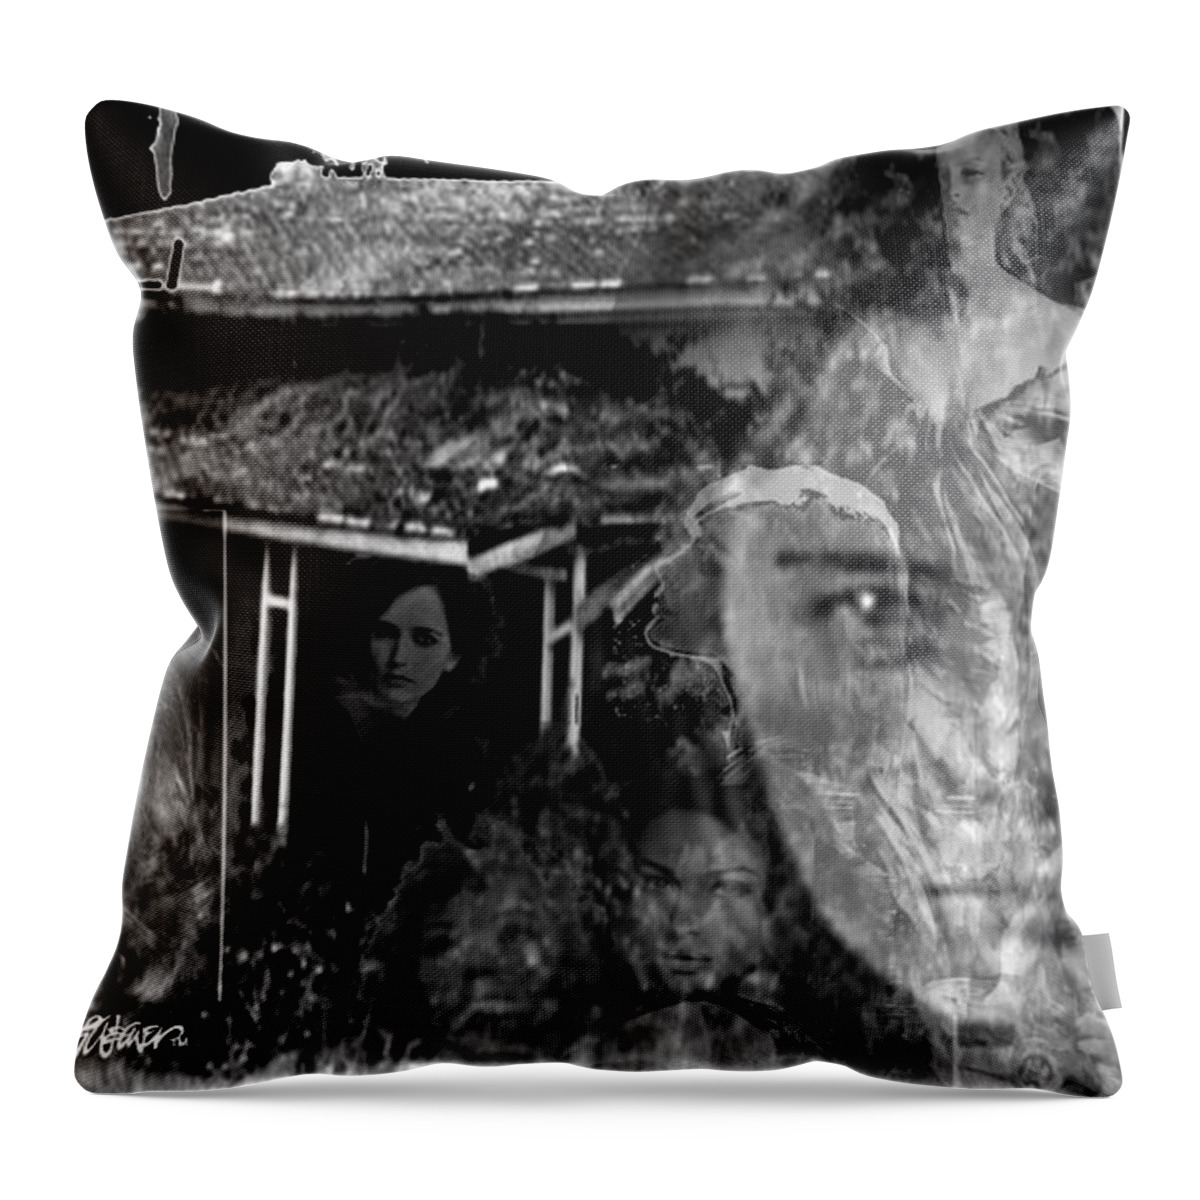 Women Of The House Throw Pillow featuring the digital art Women of the House by Seth Weaver